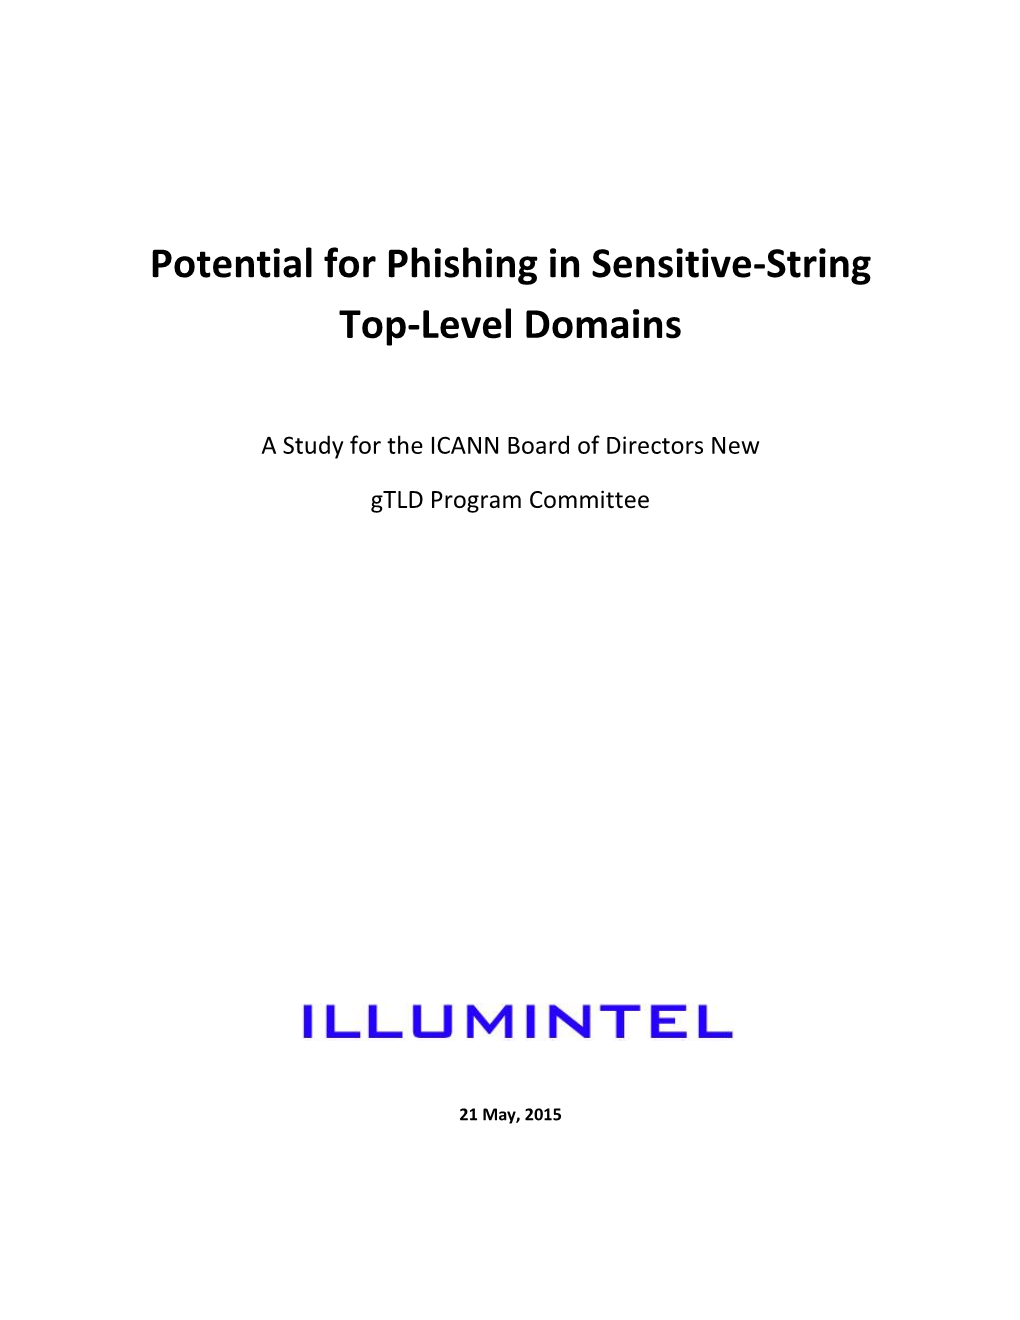 Potential for Phishing in Sensitive-String Top-Level Domains